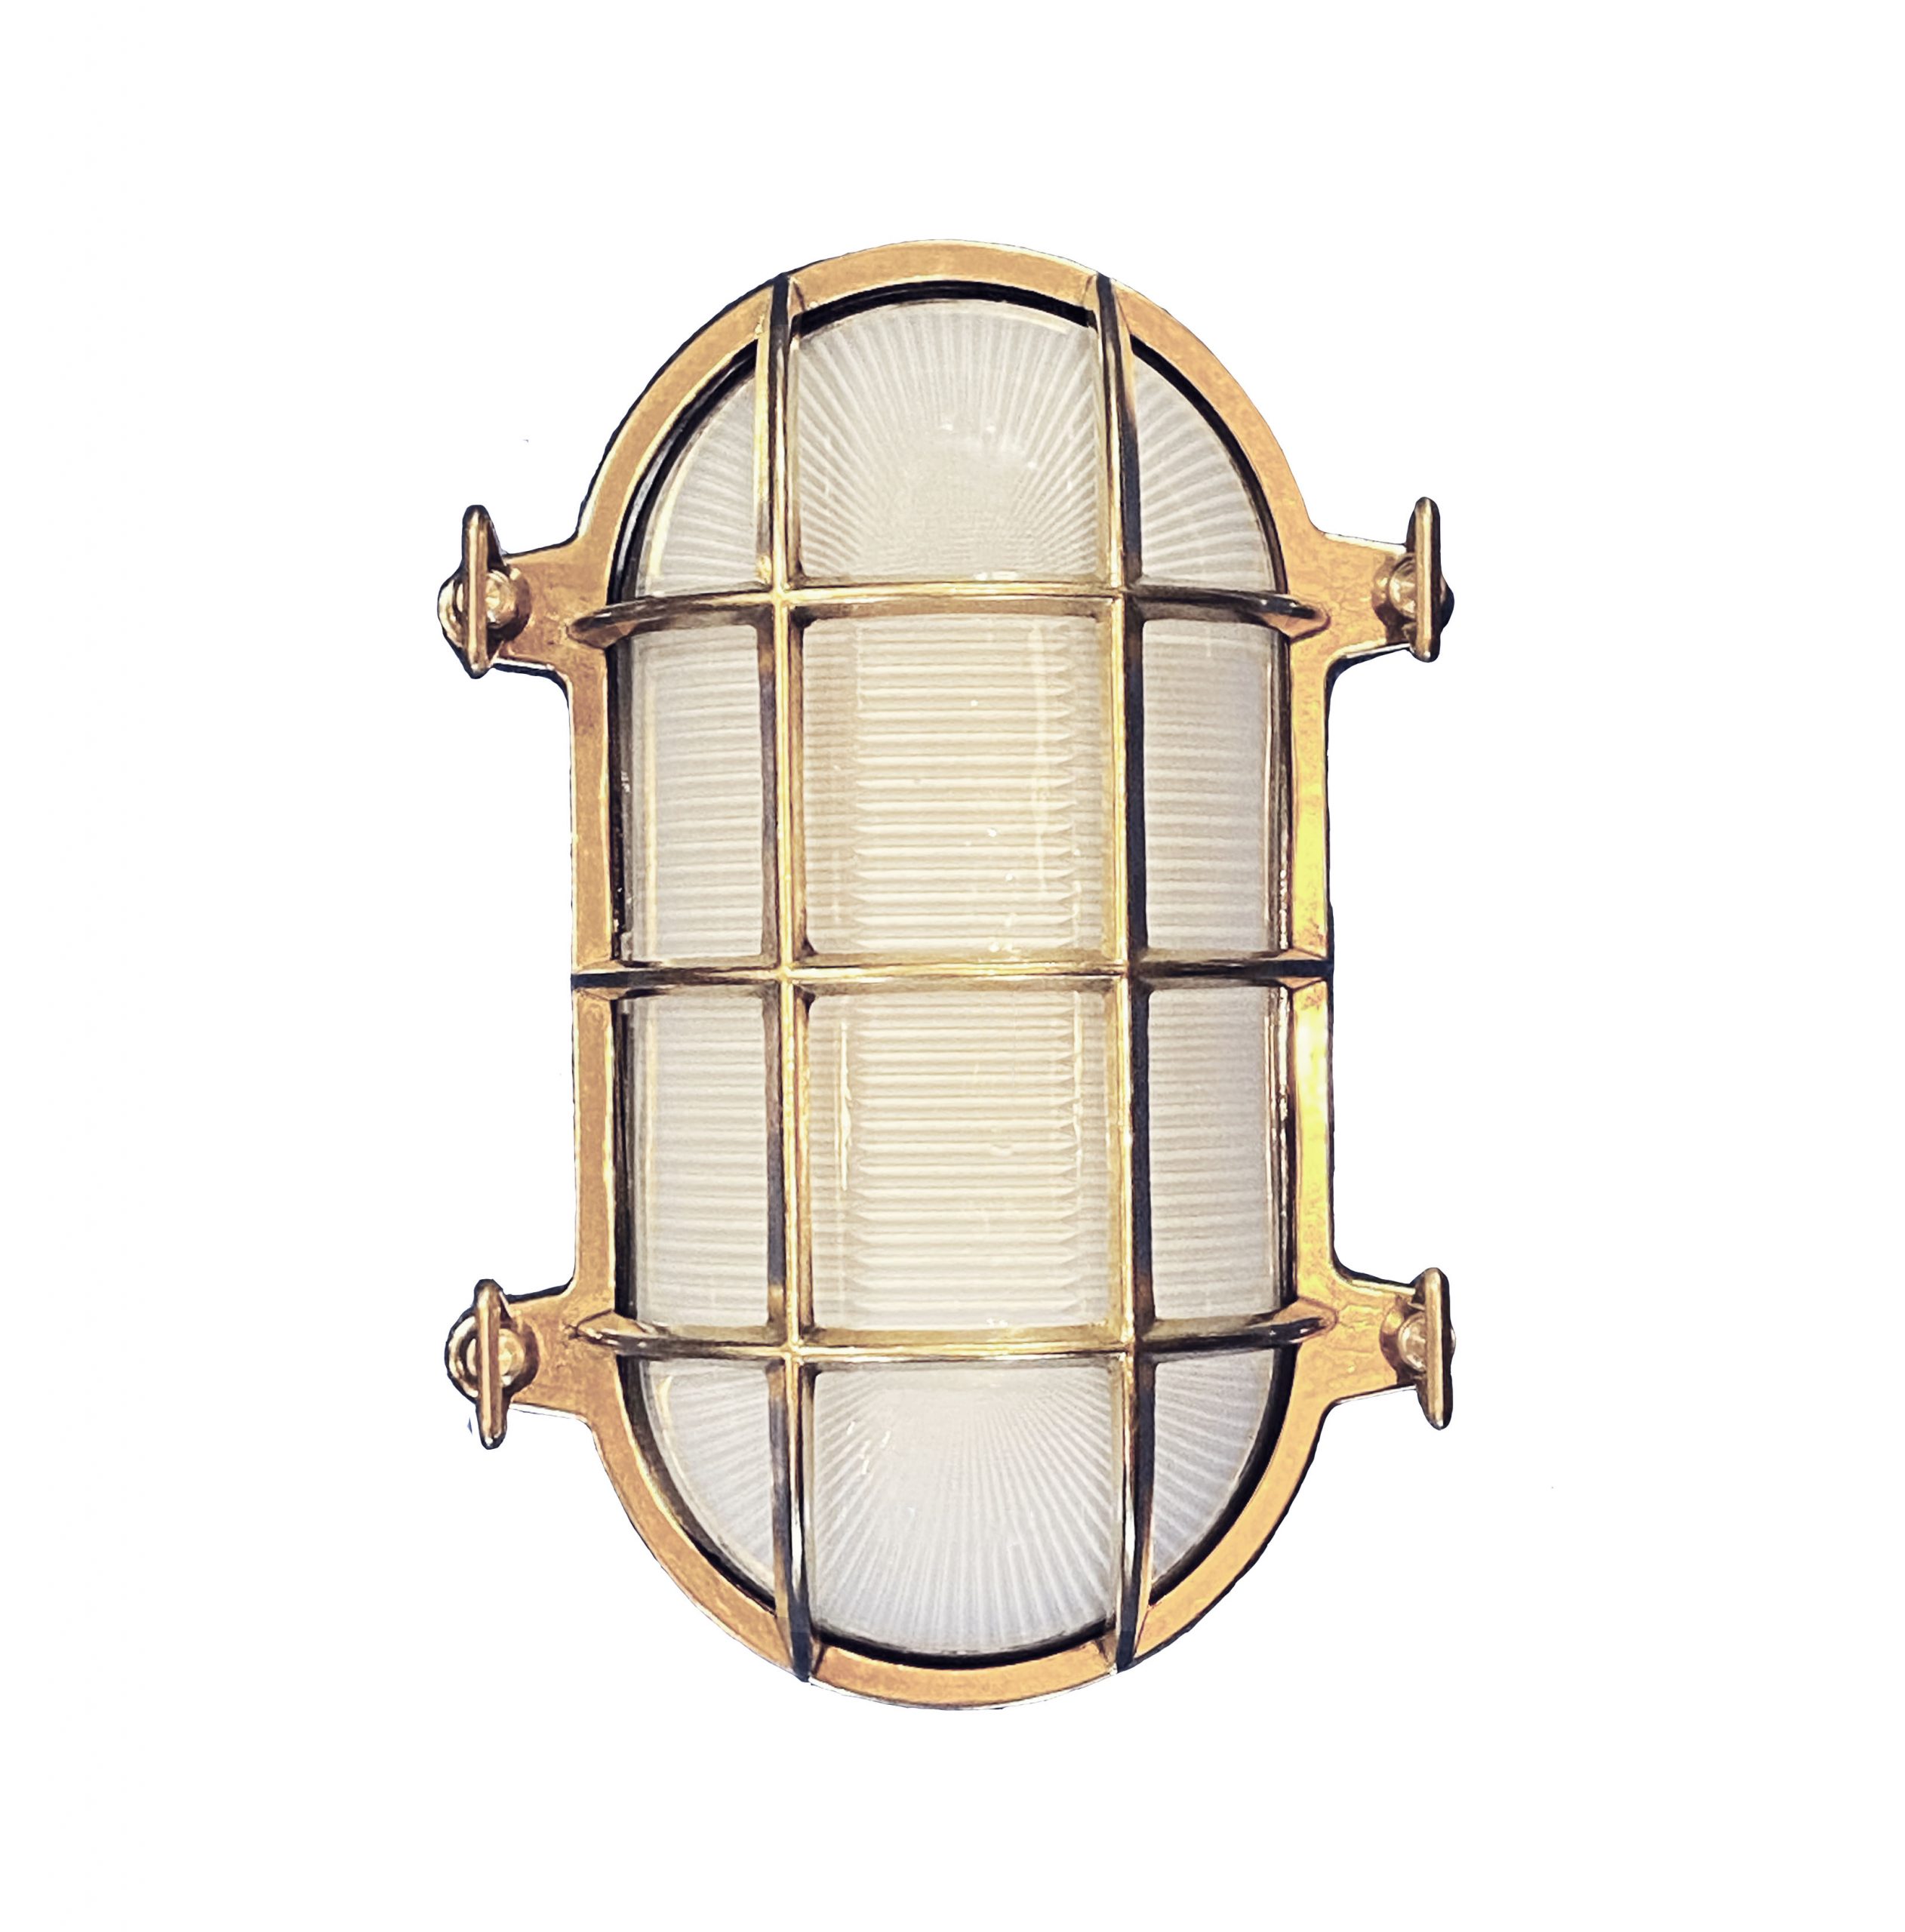 Japanese Brass Circular Bulkhead Wall Light with Hexagonal Cage & Glass  Dome Shade, 1970s for sale at Pamono